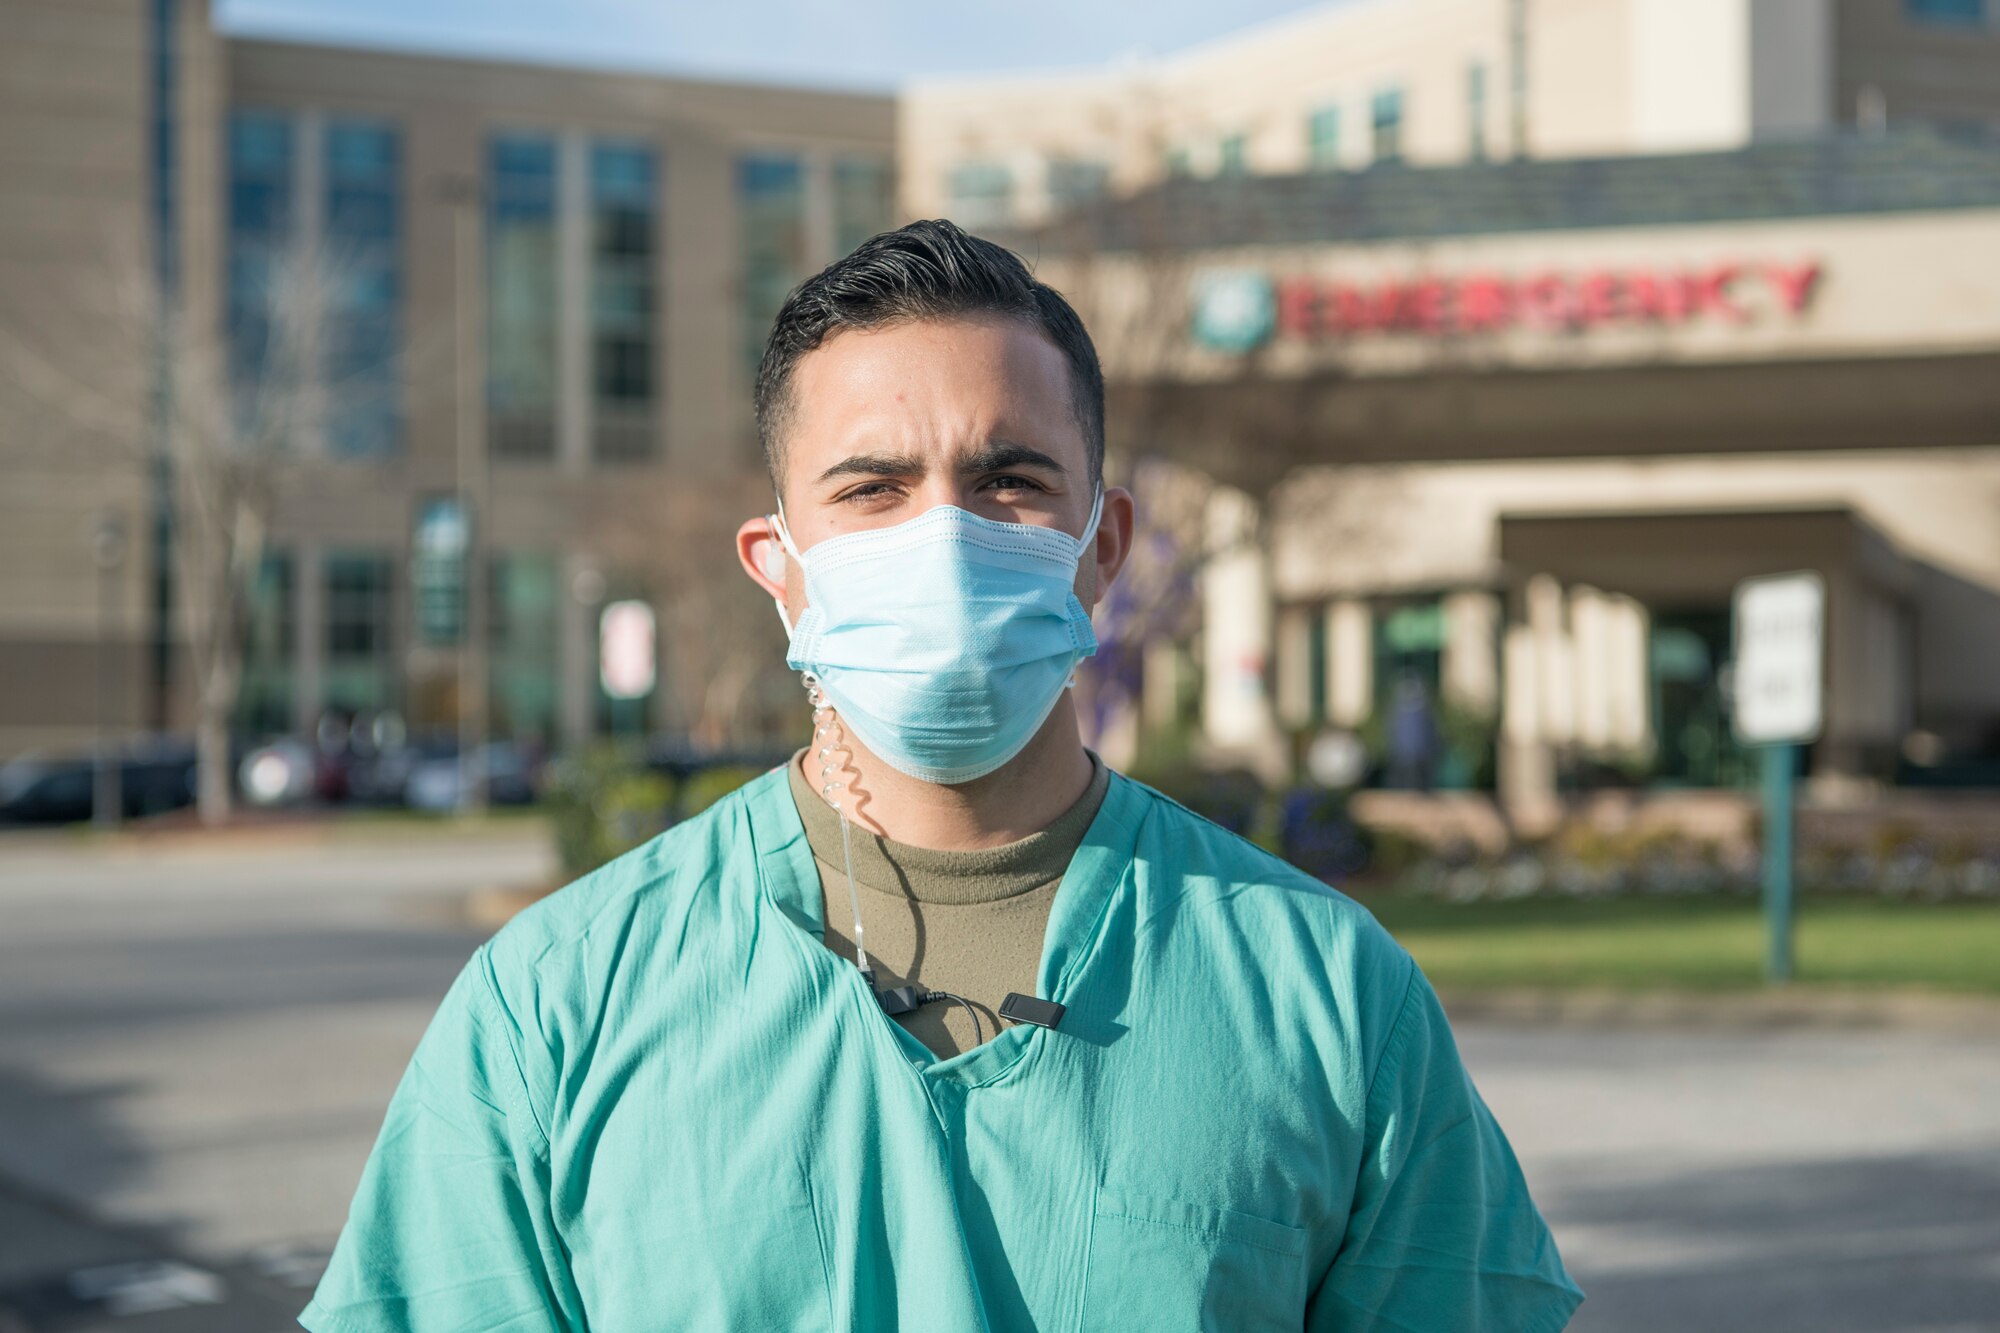 An emergency room technician smiles for a photo